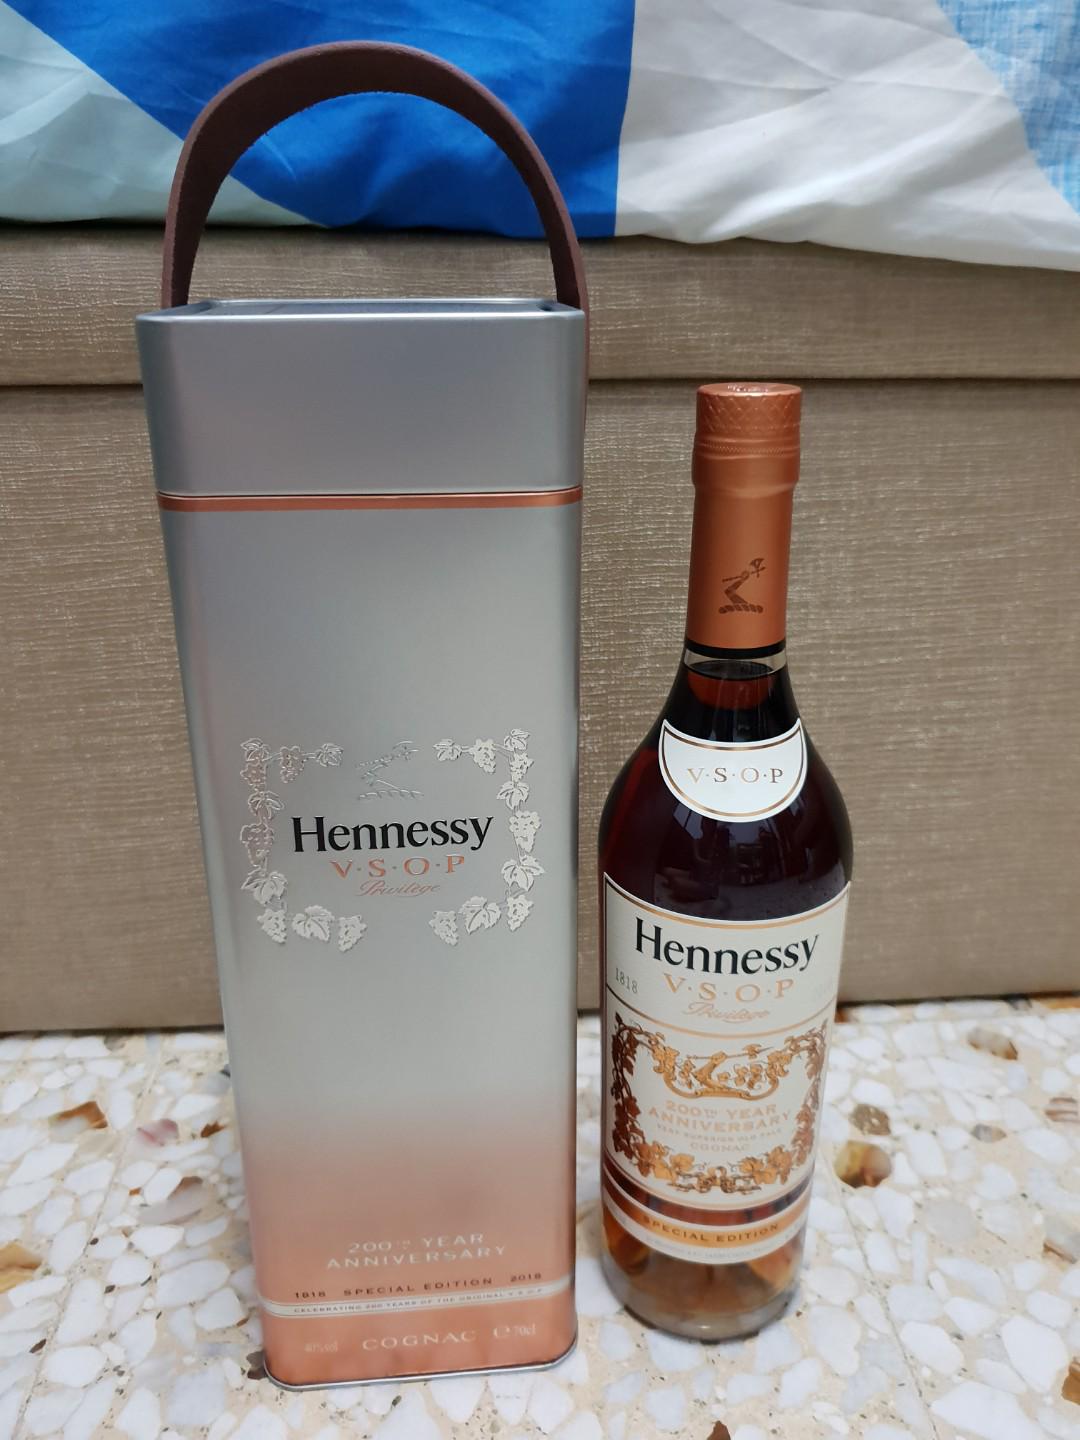 Hennessey V.S.O.P 200th Anniversary, Food & Drinks, Alcoholic